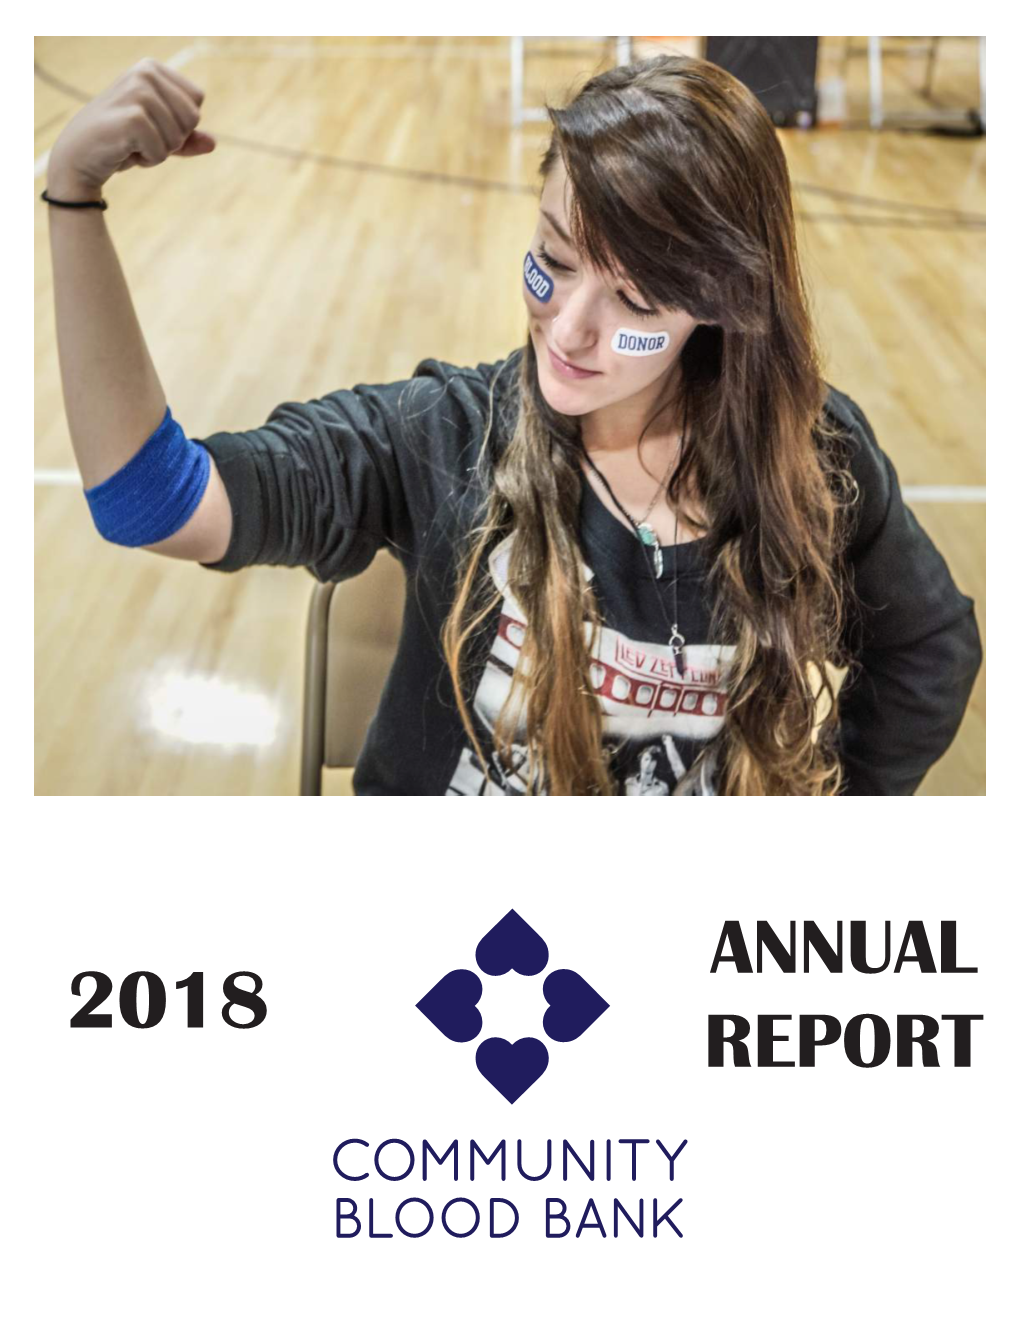 Community Blood Bank 2018 Annual Report